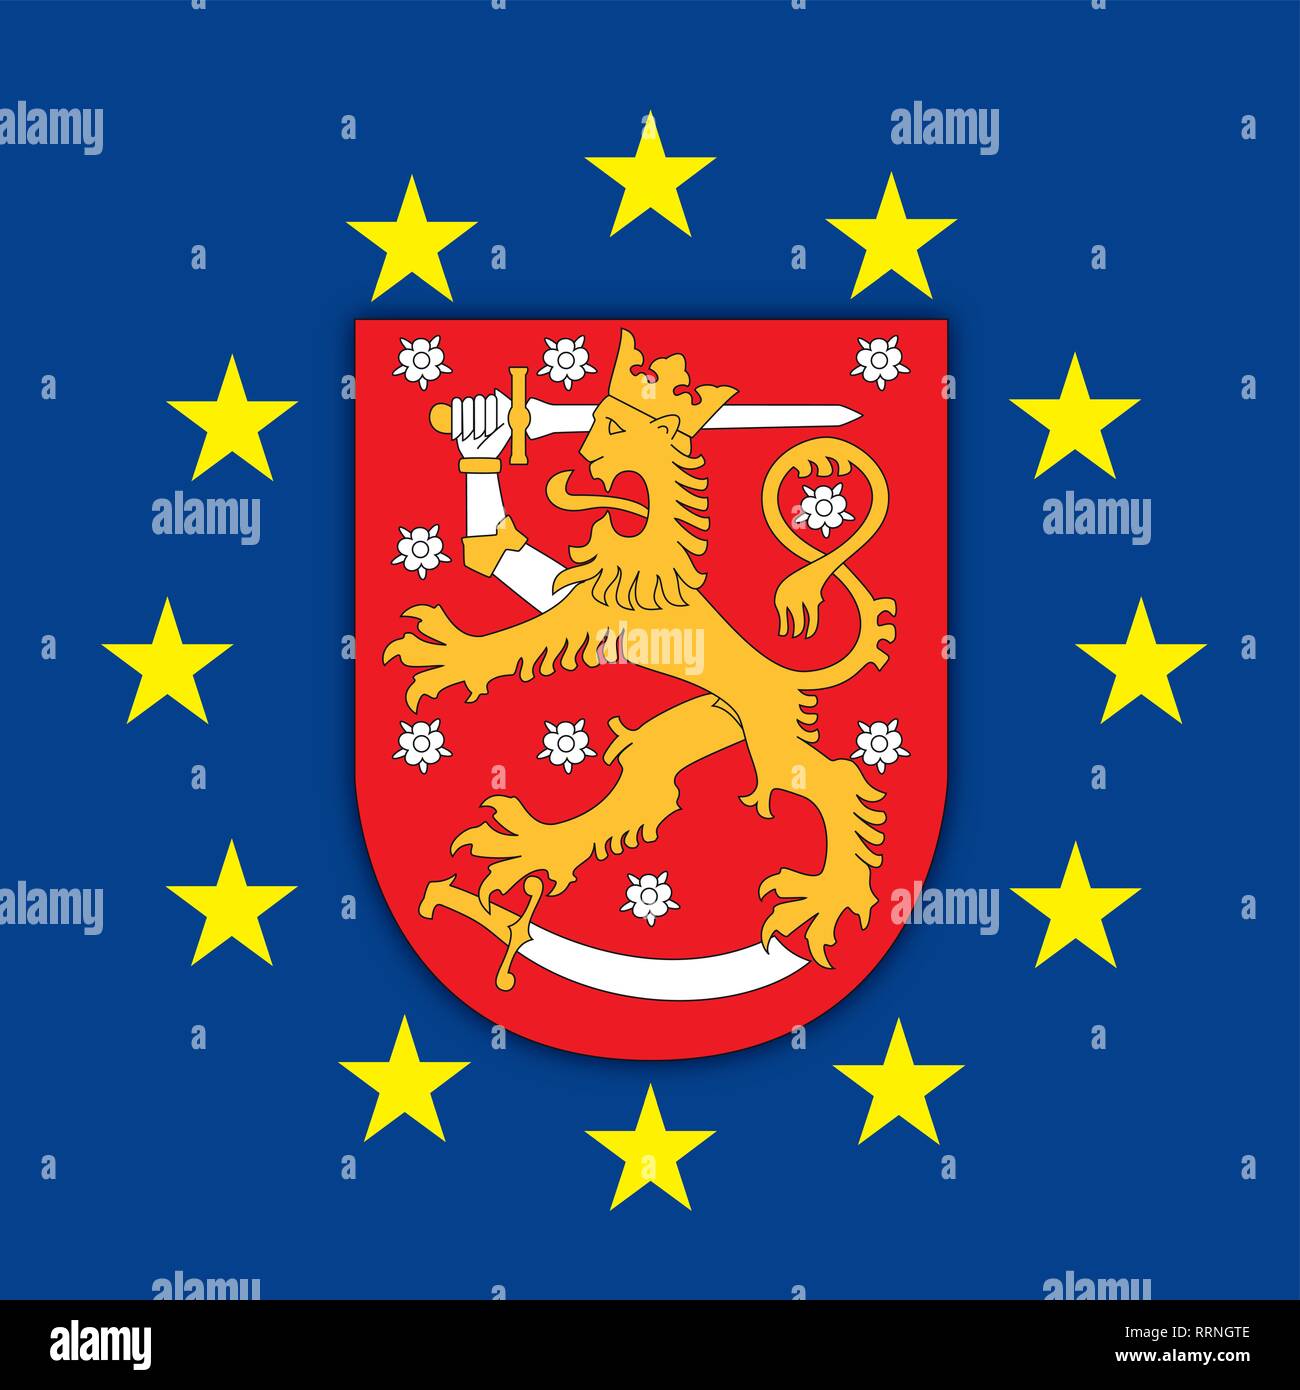 Suomi Finland coat of arms on the European Union flag, vector illustration Stock Vector